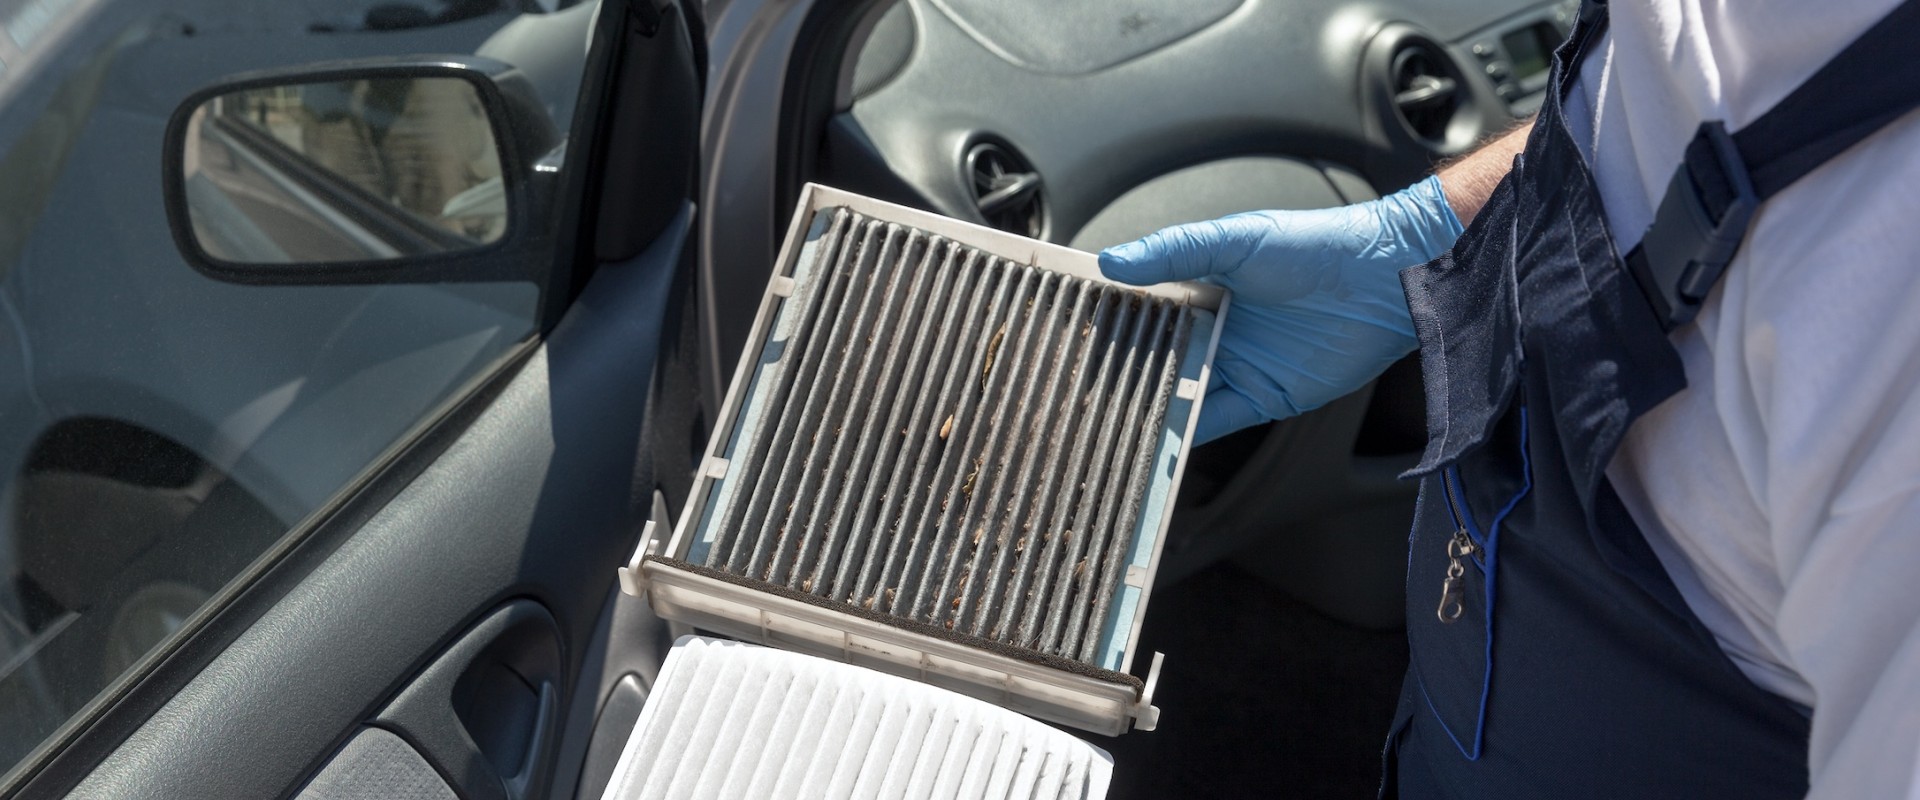 Timely Air Conditioning Filter Replacement